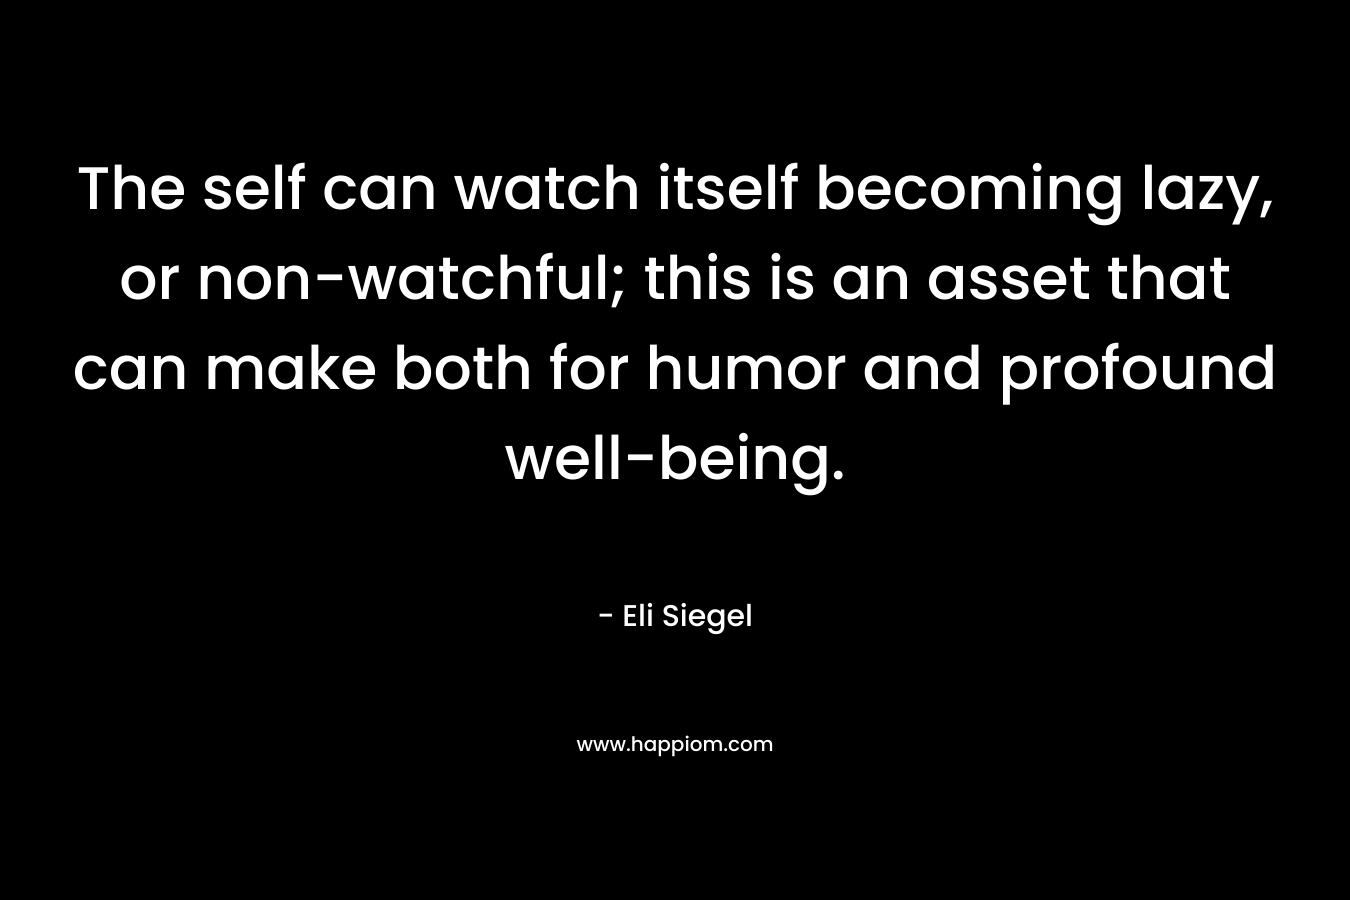 The self can watch itself becoming lazy, or non-watchful; this is an asset that can make both for humor and profound well-being. – Eli Siegel